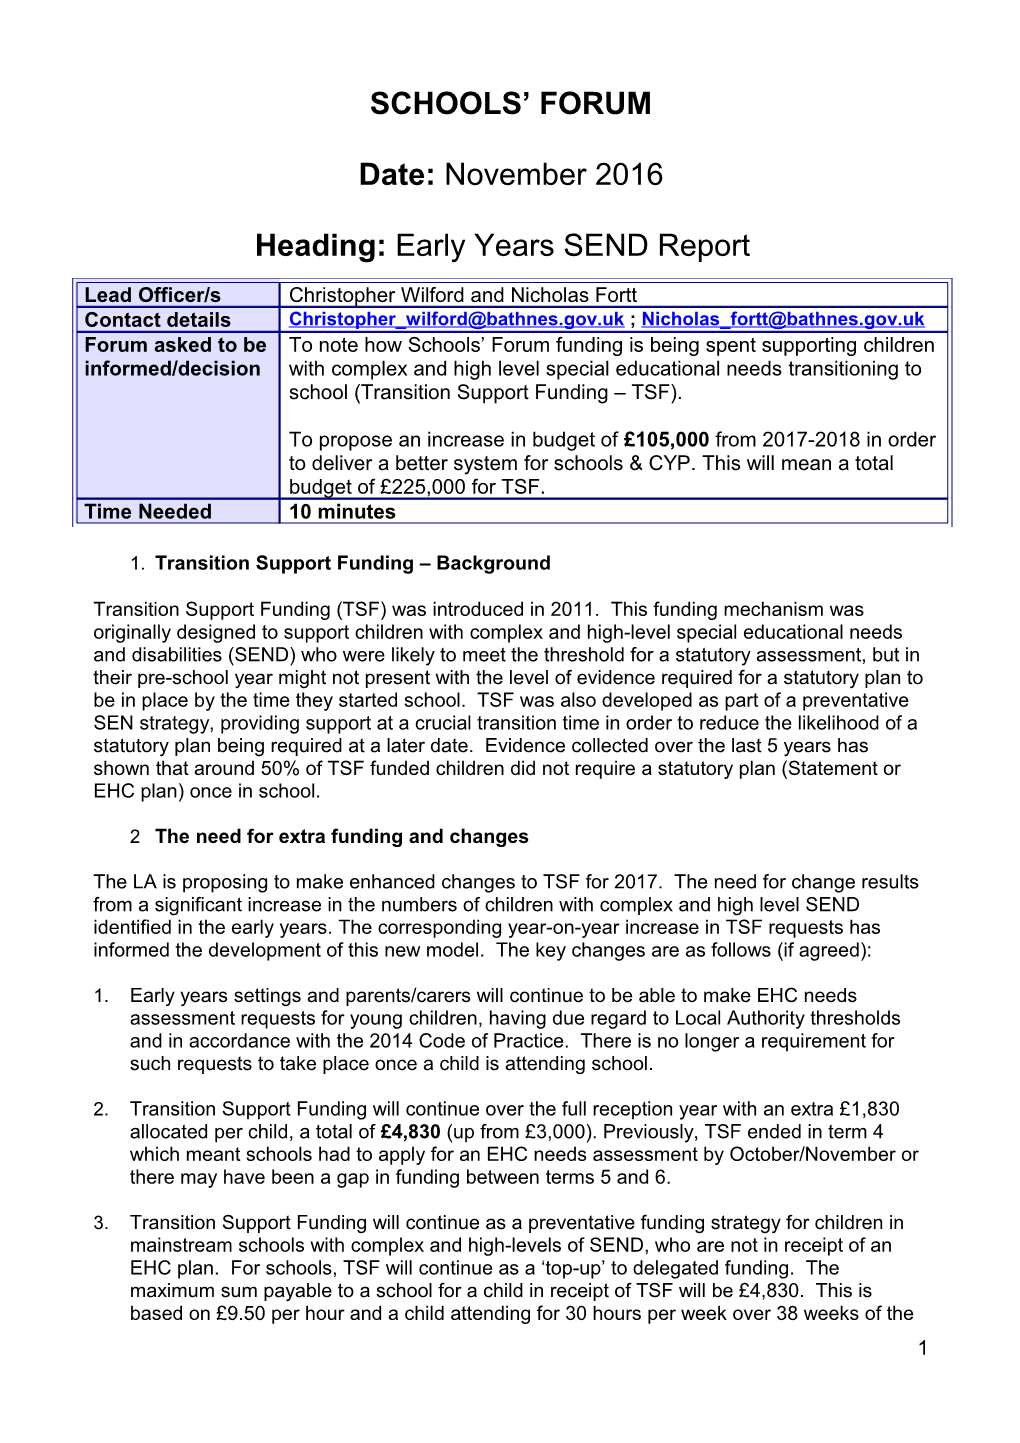 Heading:Early Years SEND Report